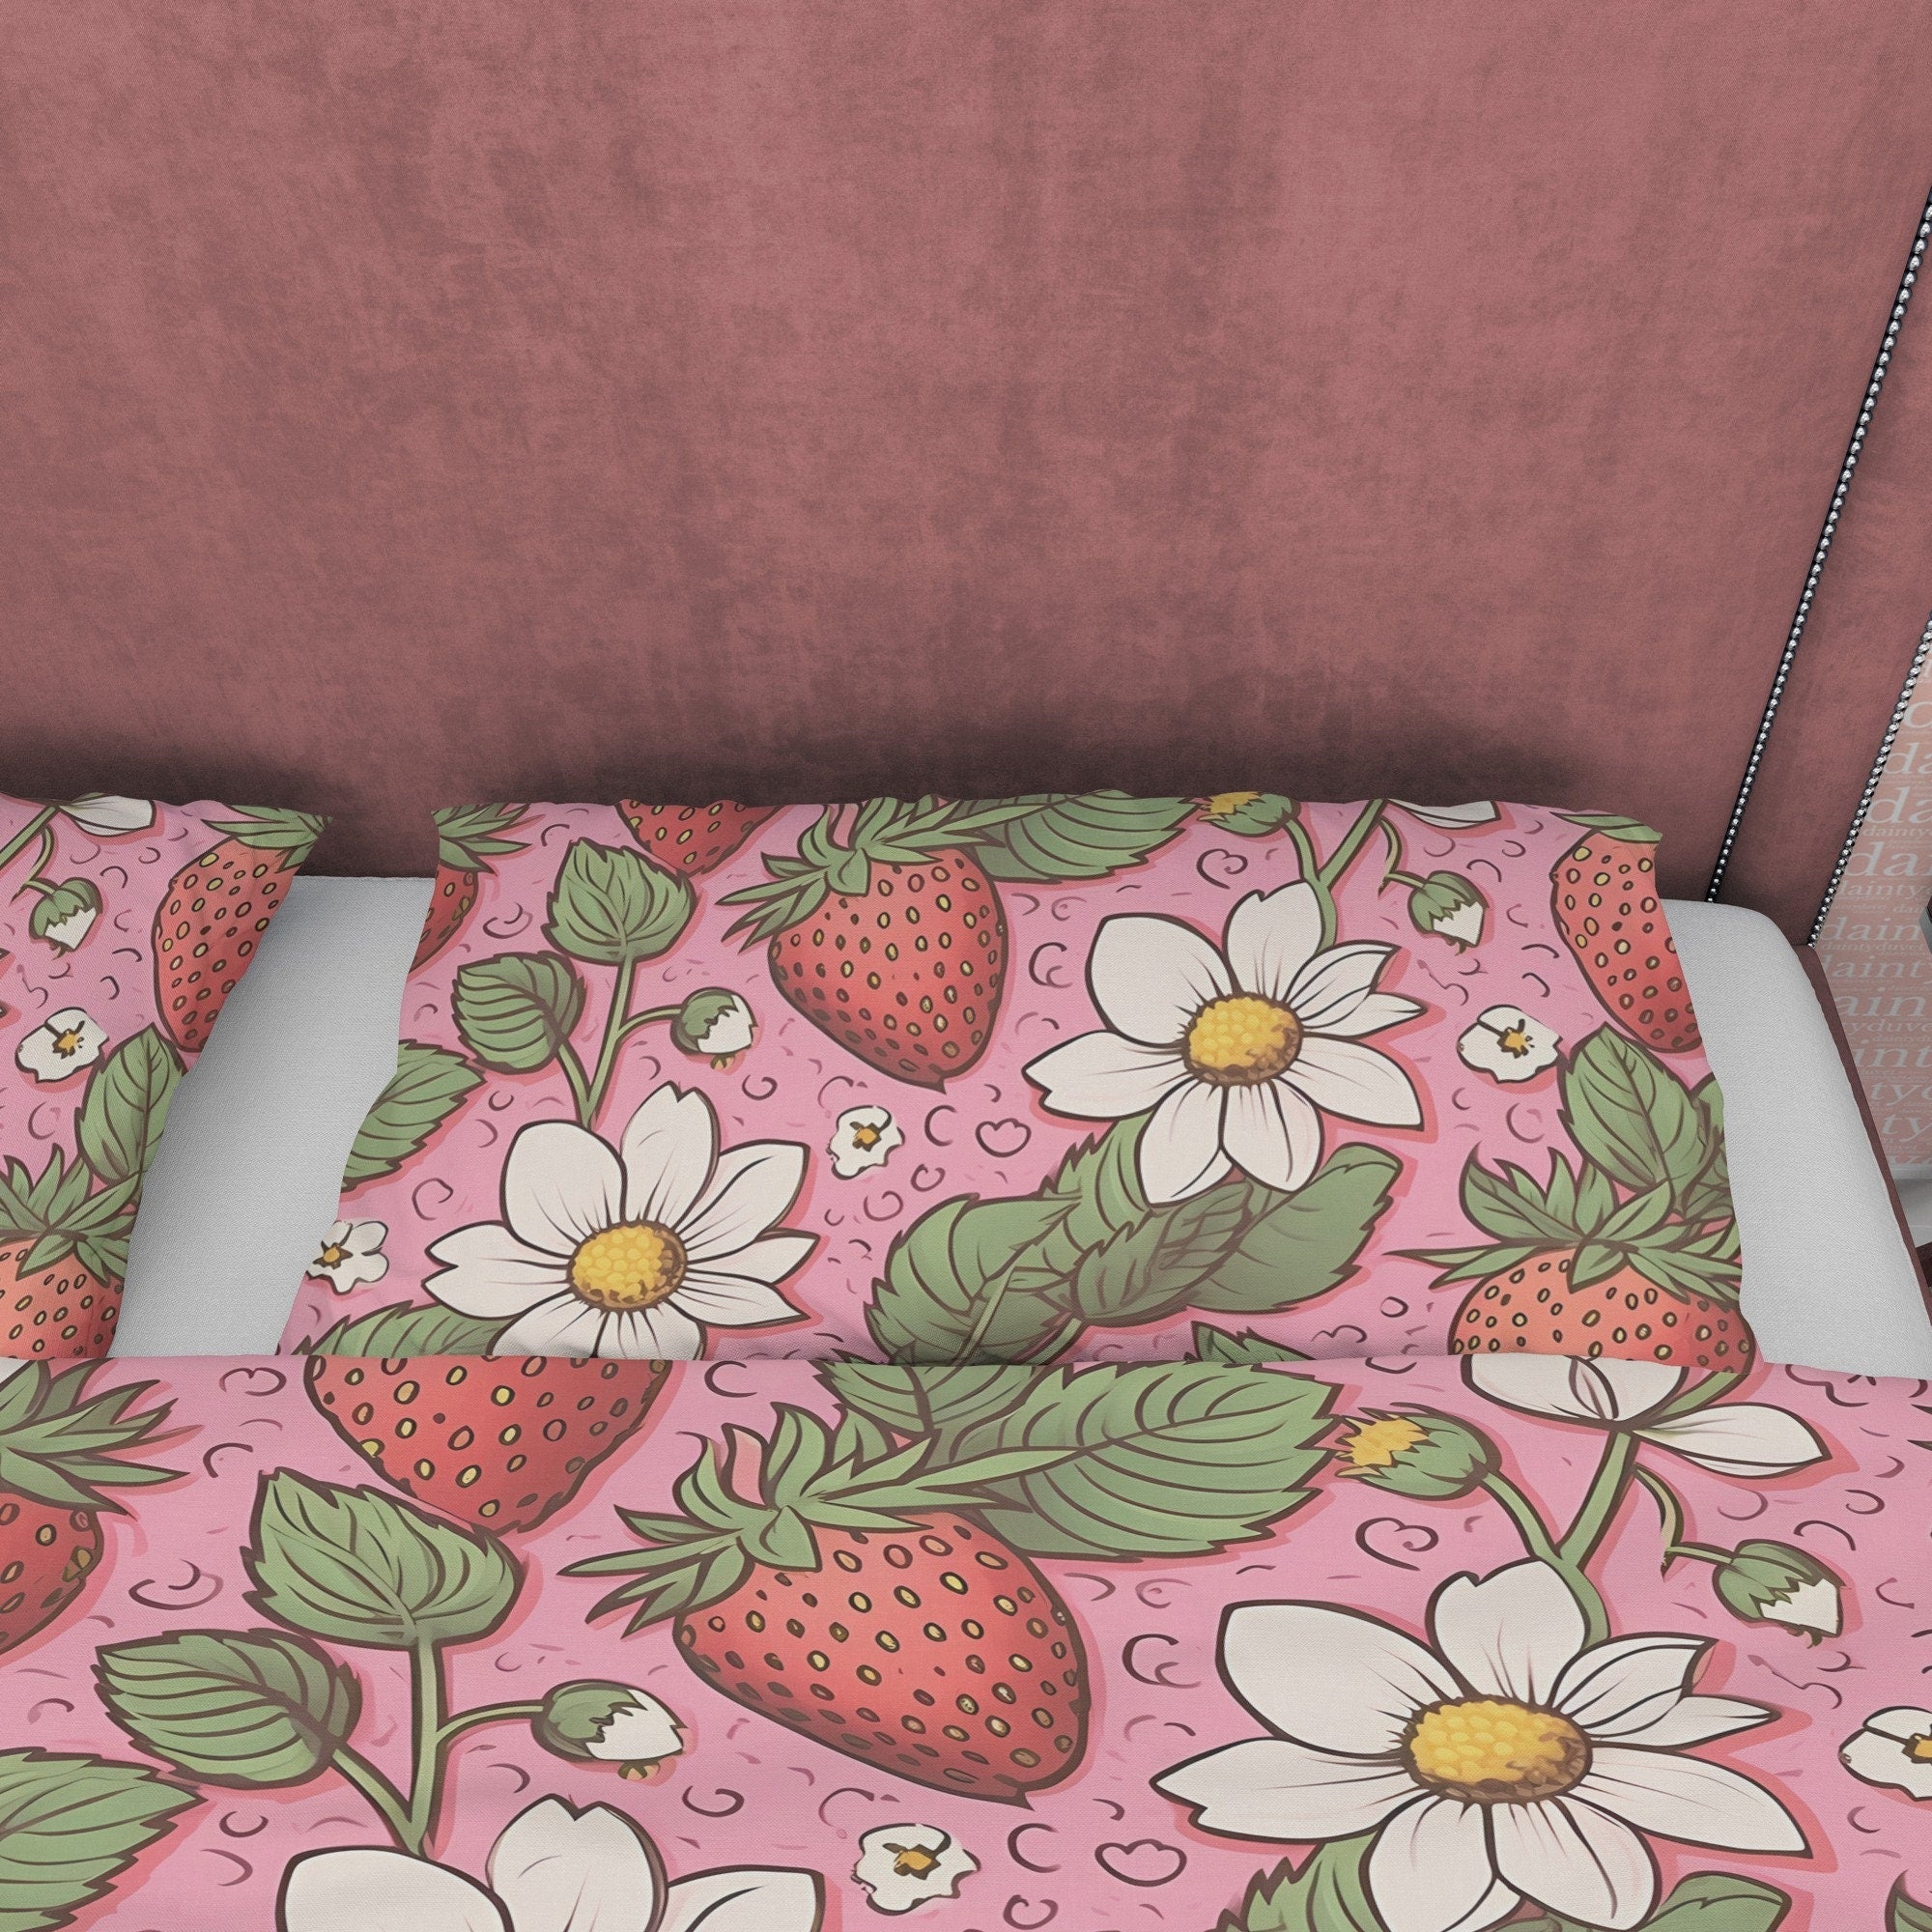 Cute Strawberry Duvet Cover Boho Bedroom Set, Floral Pink Bedspread, Girly Quilt Cover, Dorm Bedding, Baby Girl Toddler Bedding, Foodie Gift